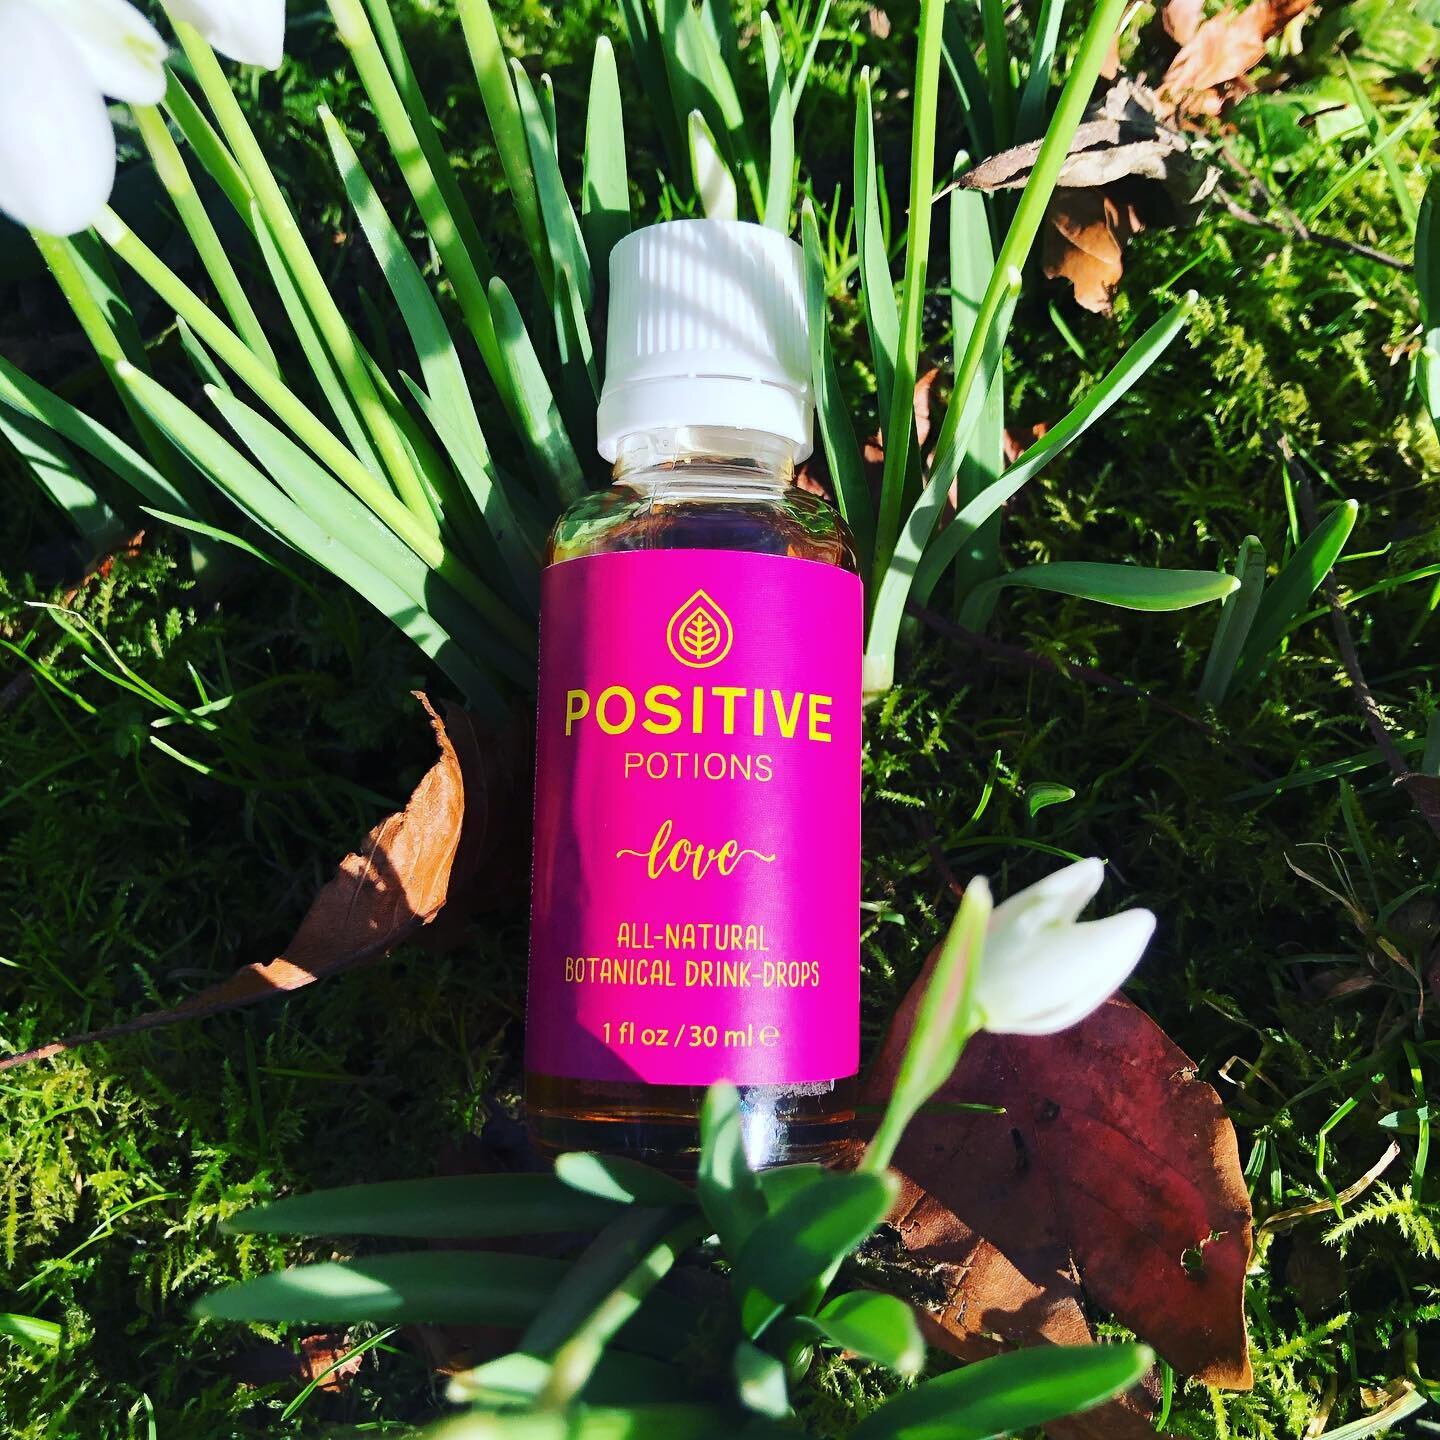 All about the #love 💖 Spring on the way on Anglesey, everything in bud, gestating, just about to break out into new life! 🌱☀️💖#thepowerofpositivedrinking #jointheherbalrevolution #anglesey #walledgarden #secretgarden #valentines #lovepotion #sendi